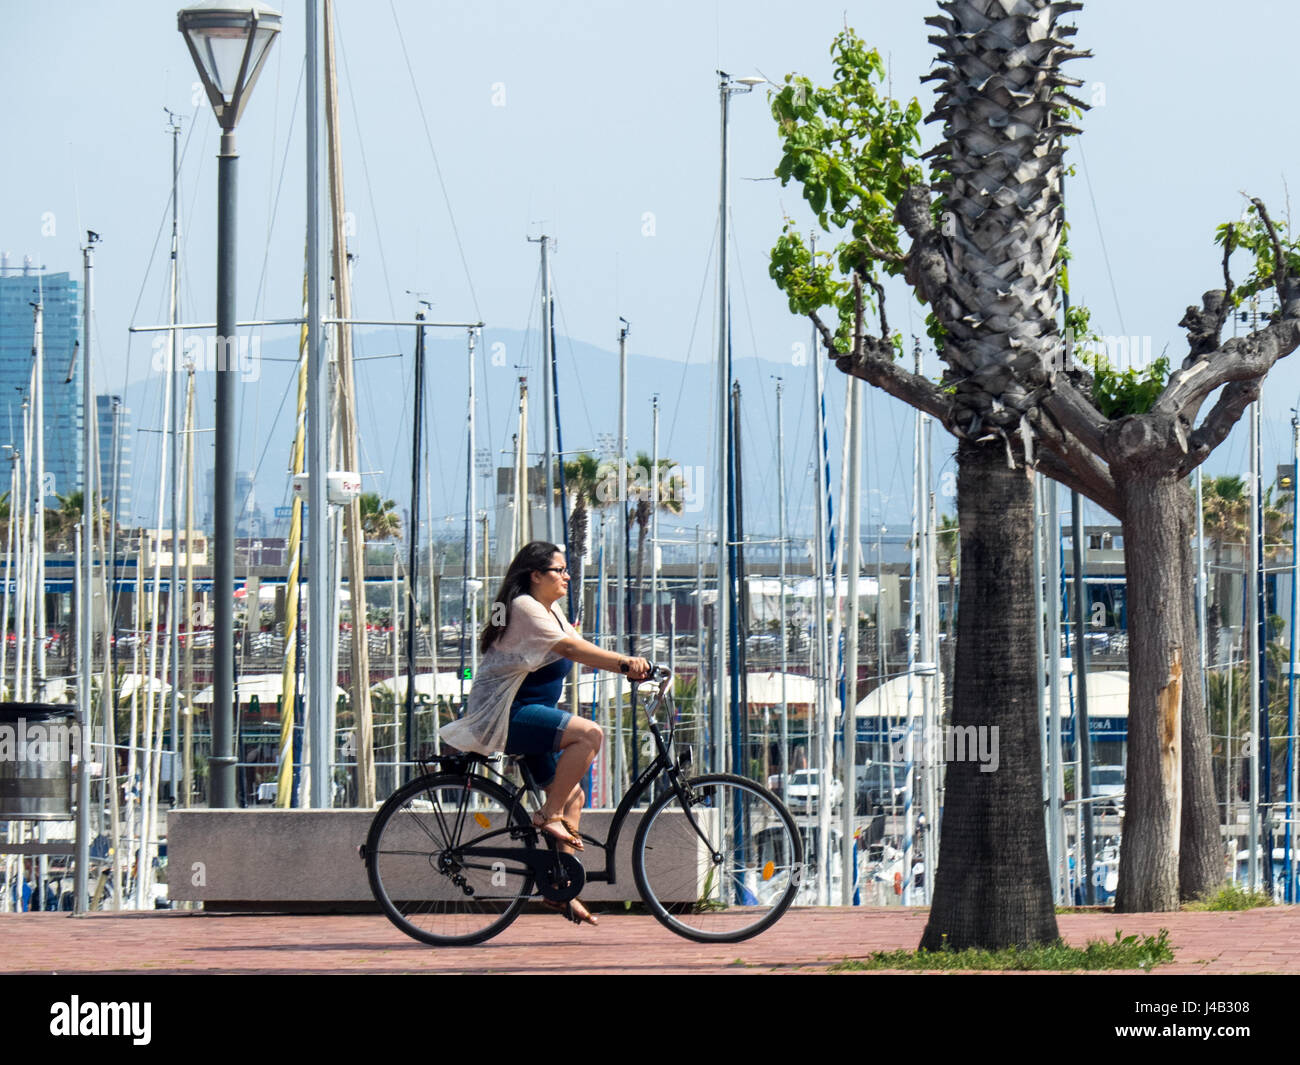 A young female adult riding a bicycle at the Olympic Port, Barcelona, Spain. Stock Photo